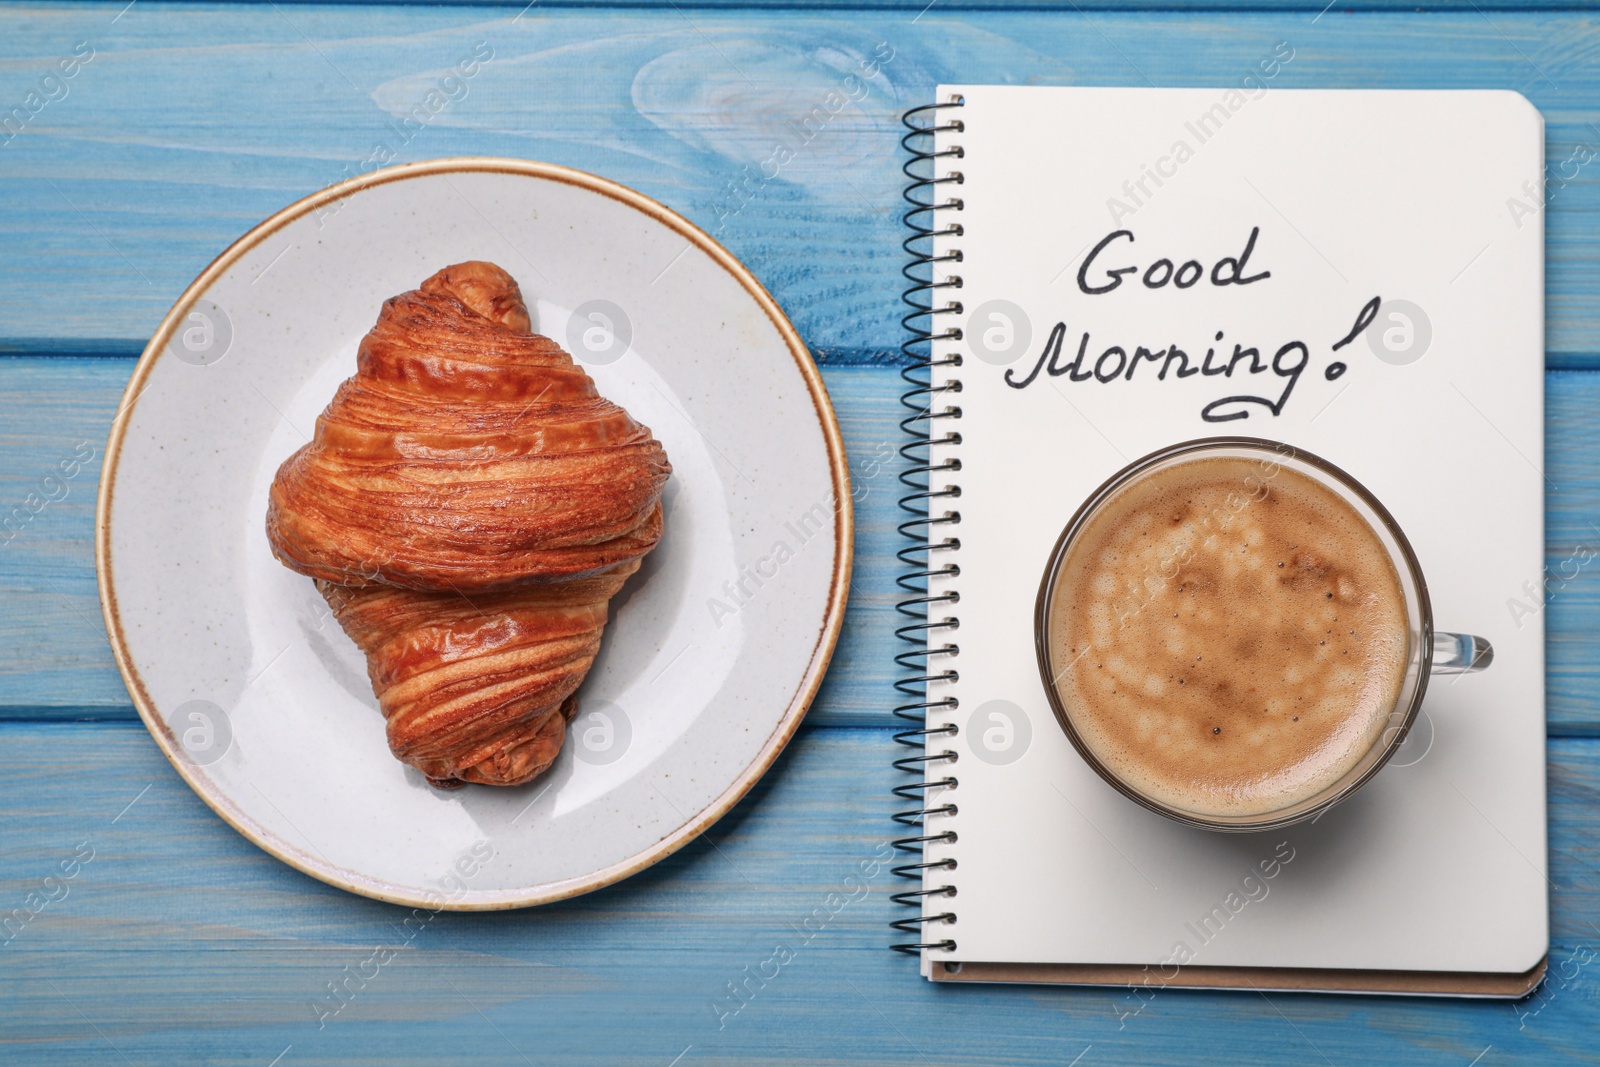 Photo of Aromatic coffee, croissant and Good Morning! message on light blue wooden table, flat lay